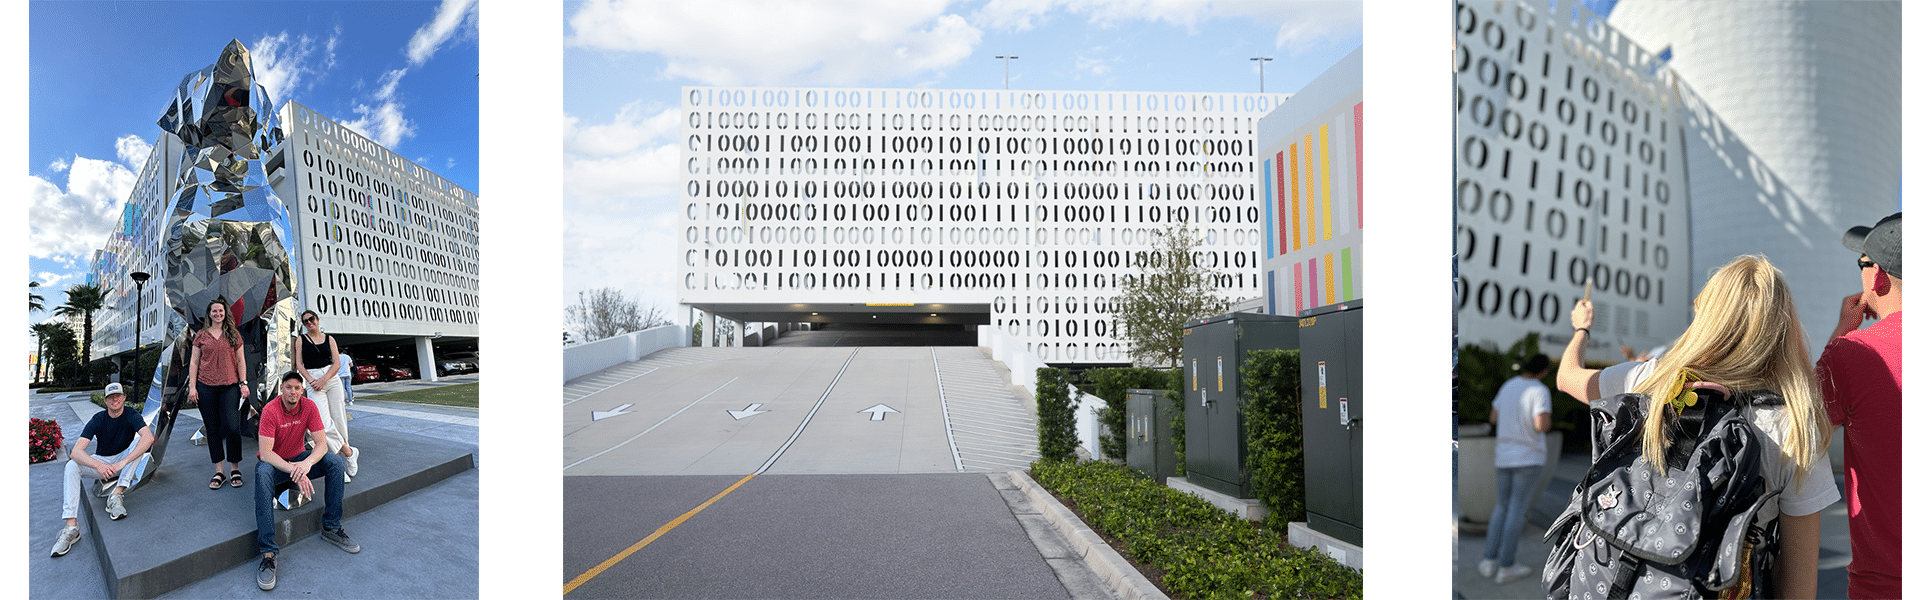 playfair data team summit 2023 parking garage art installation the code wall in lake nona fl binary code team challenge to translate data into valuable insights